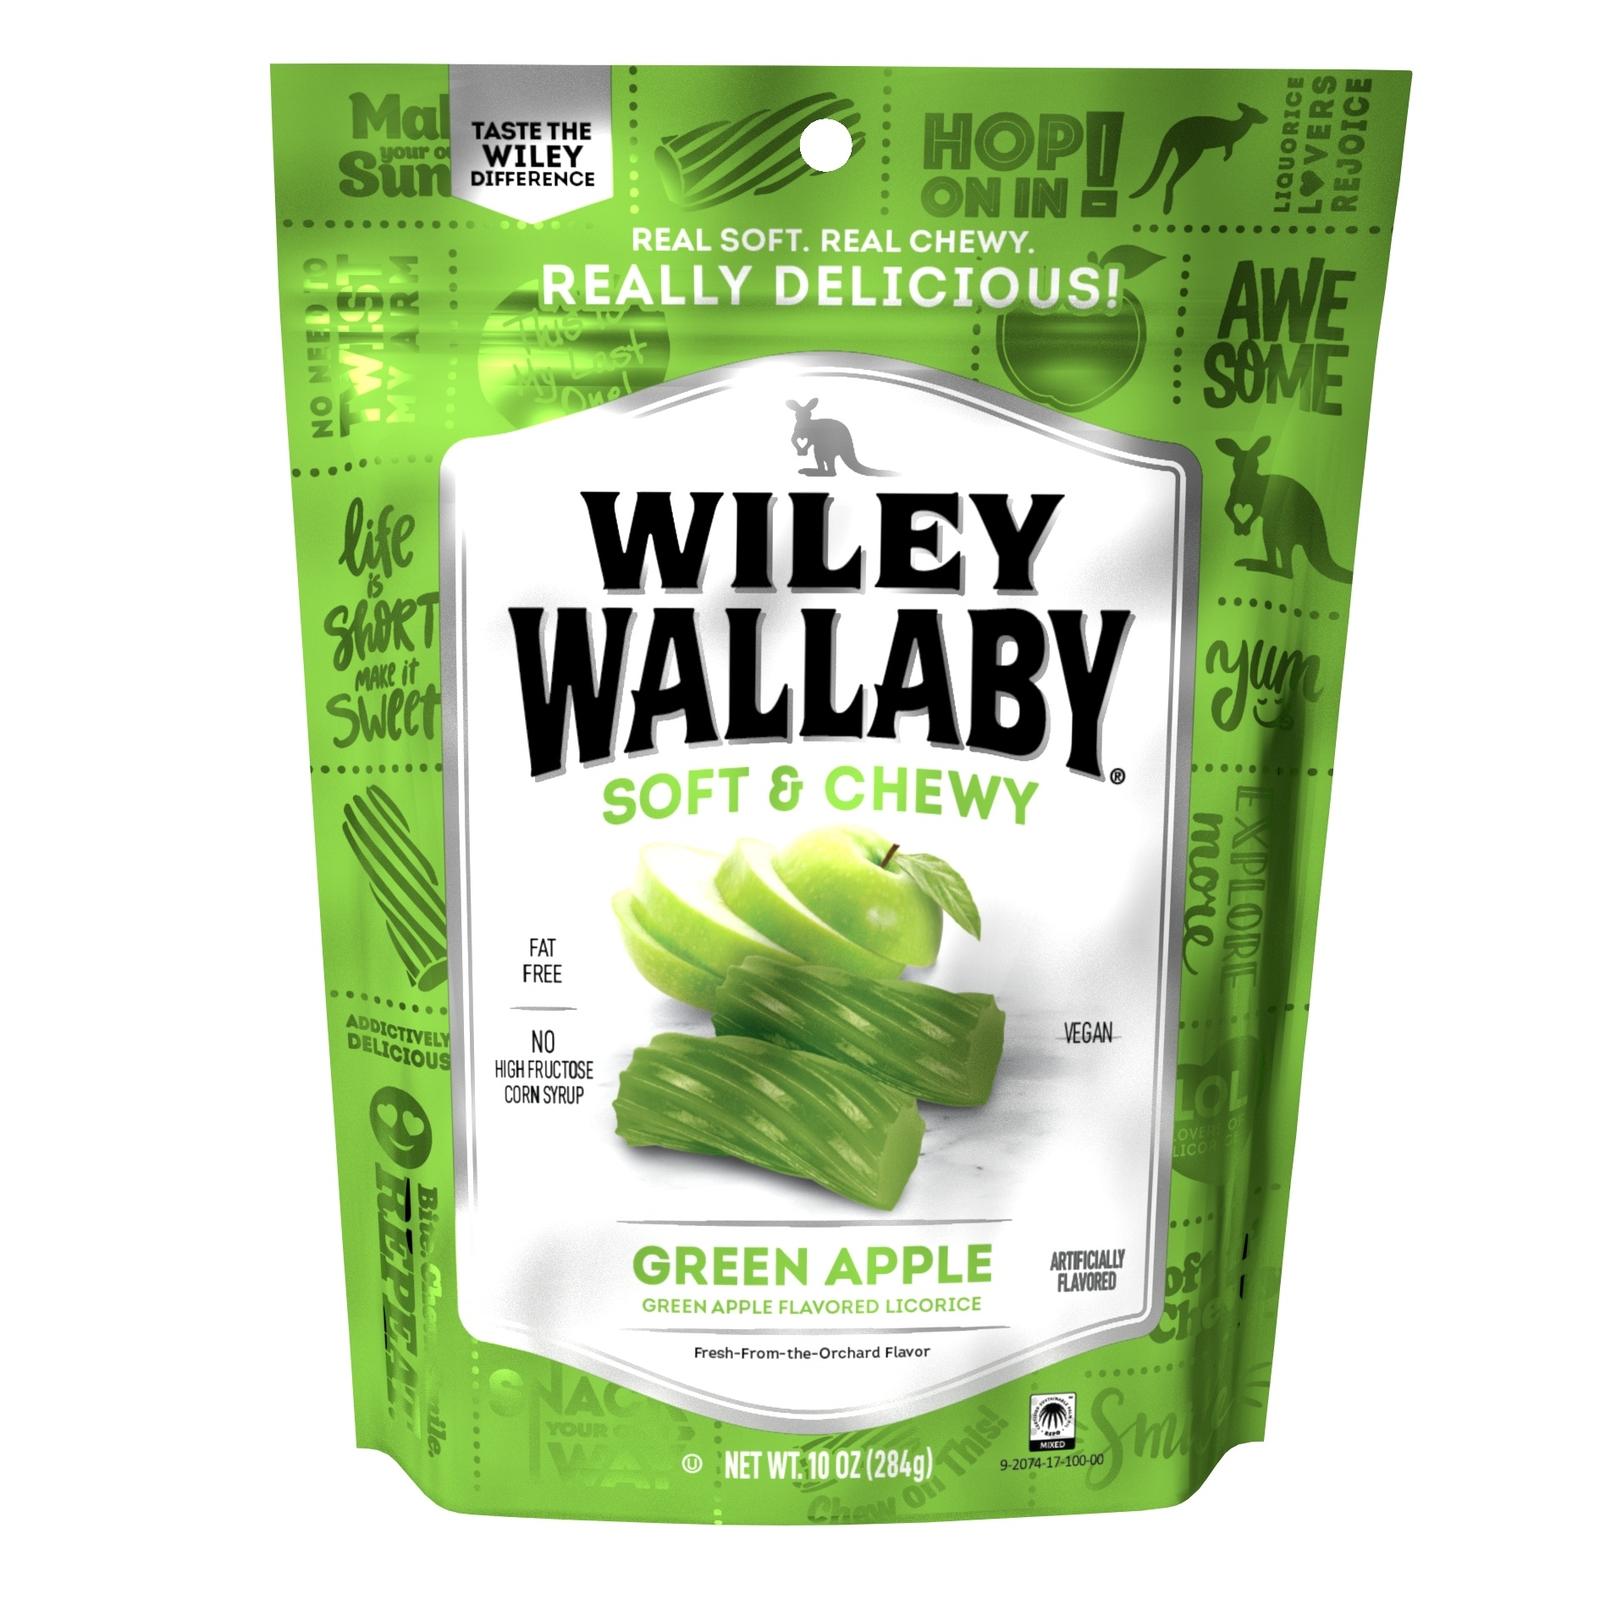 Wiley Wallaby Green Apple Licorice